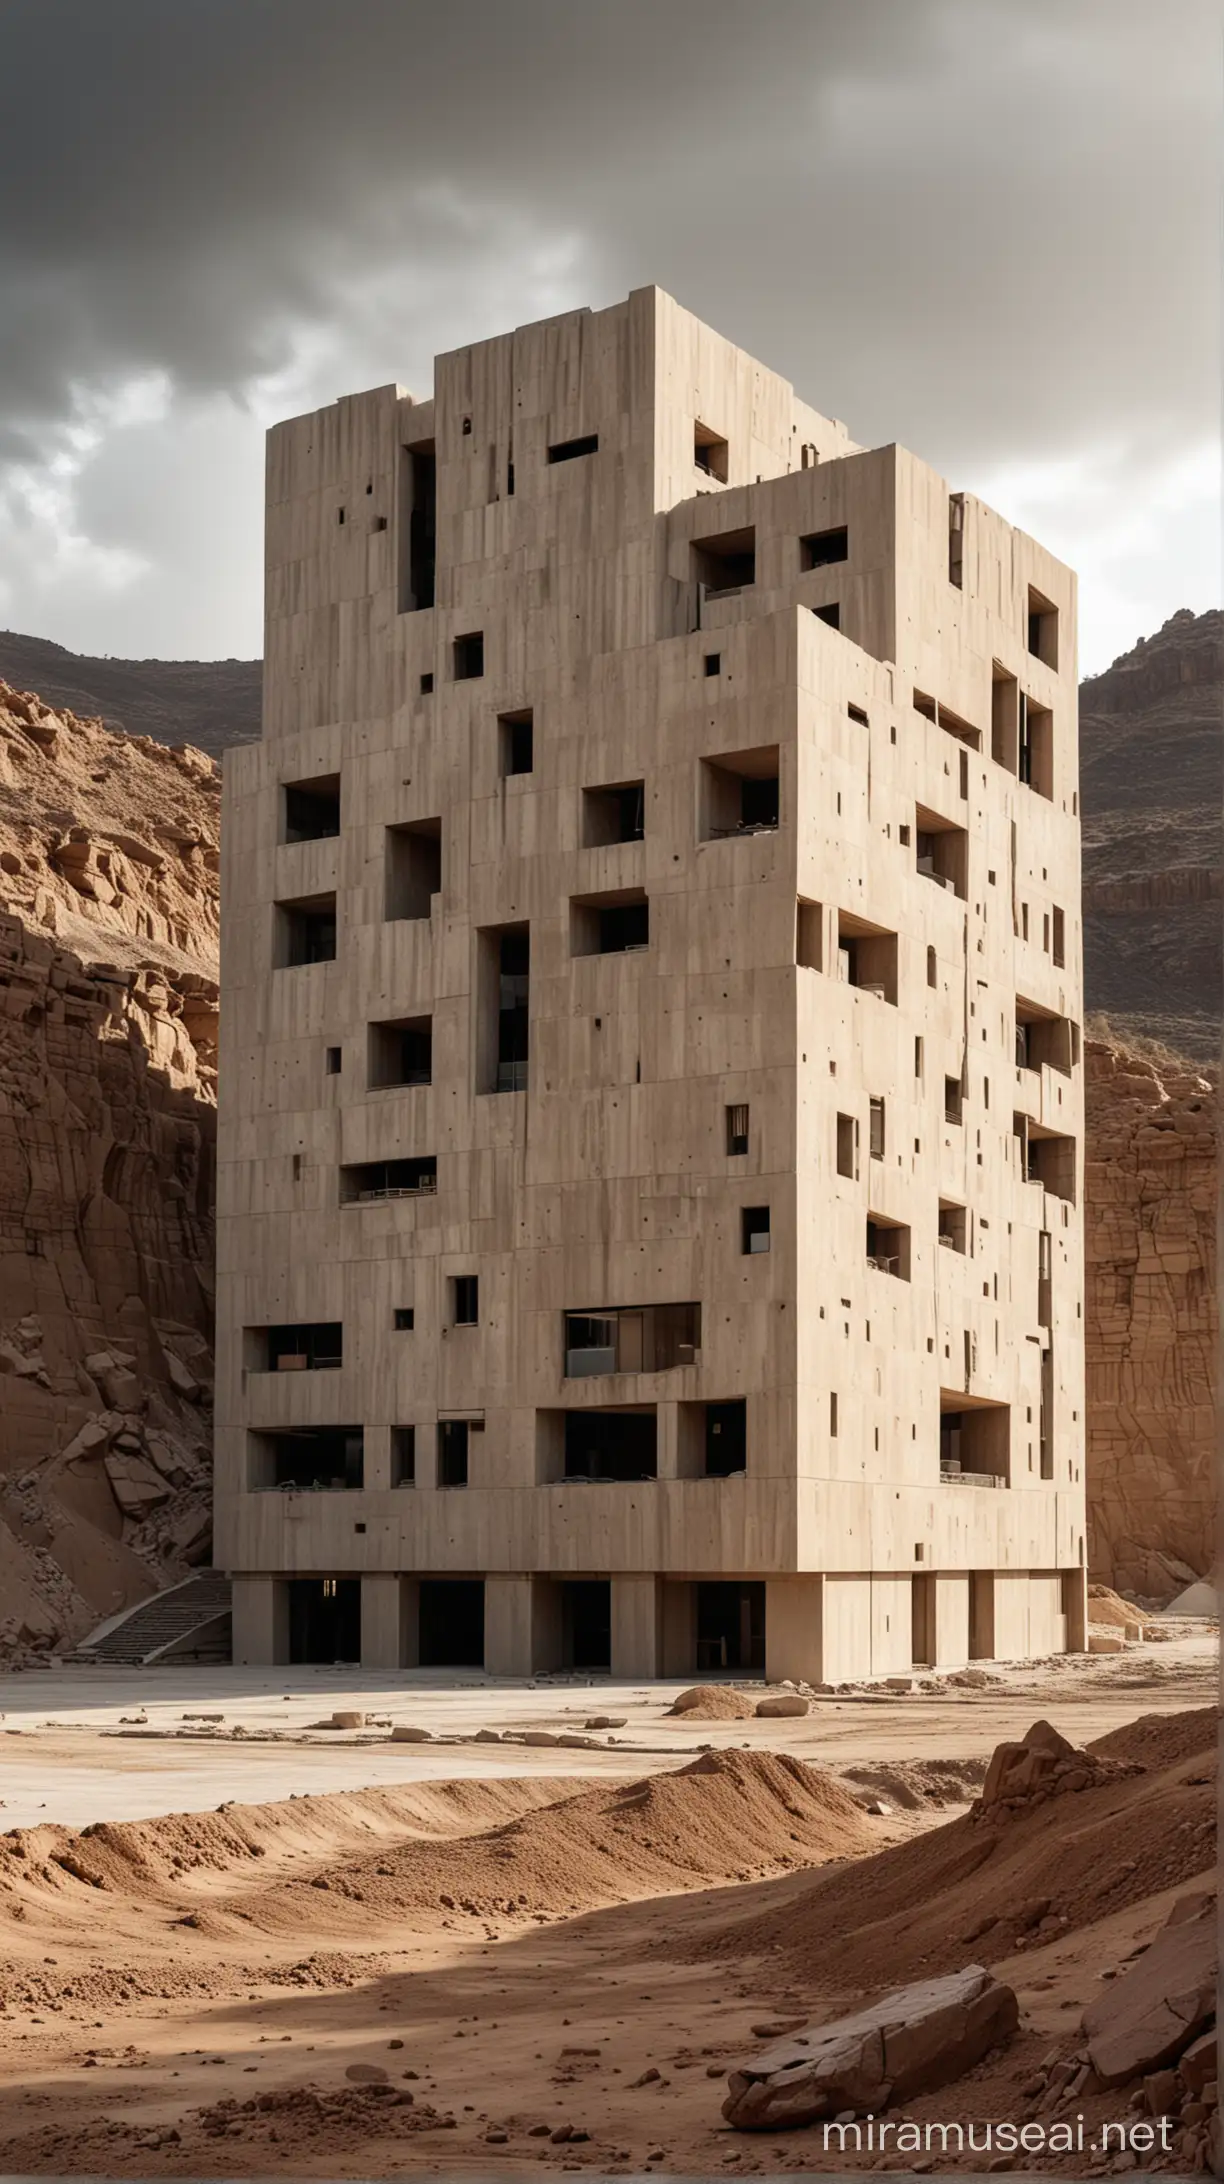 Abstract Concrete and Rammed Earth Building in OpenAir Environment